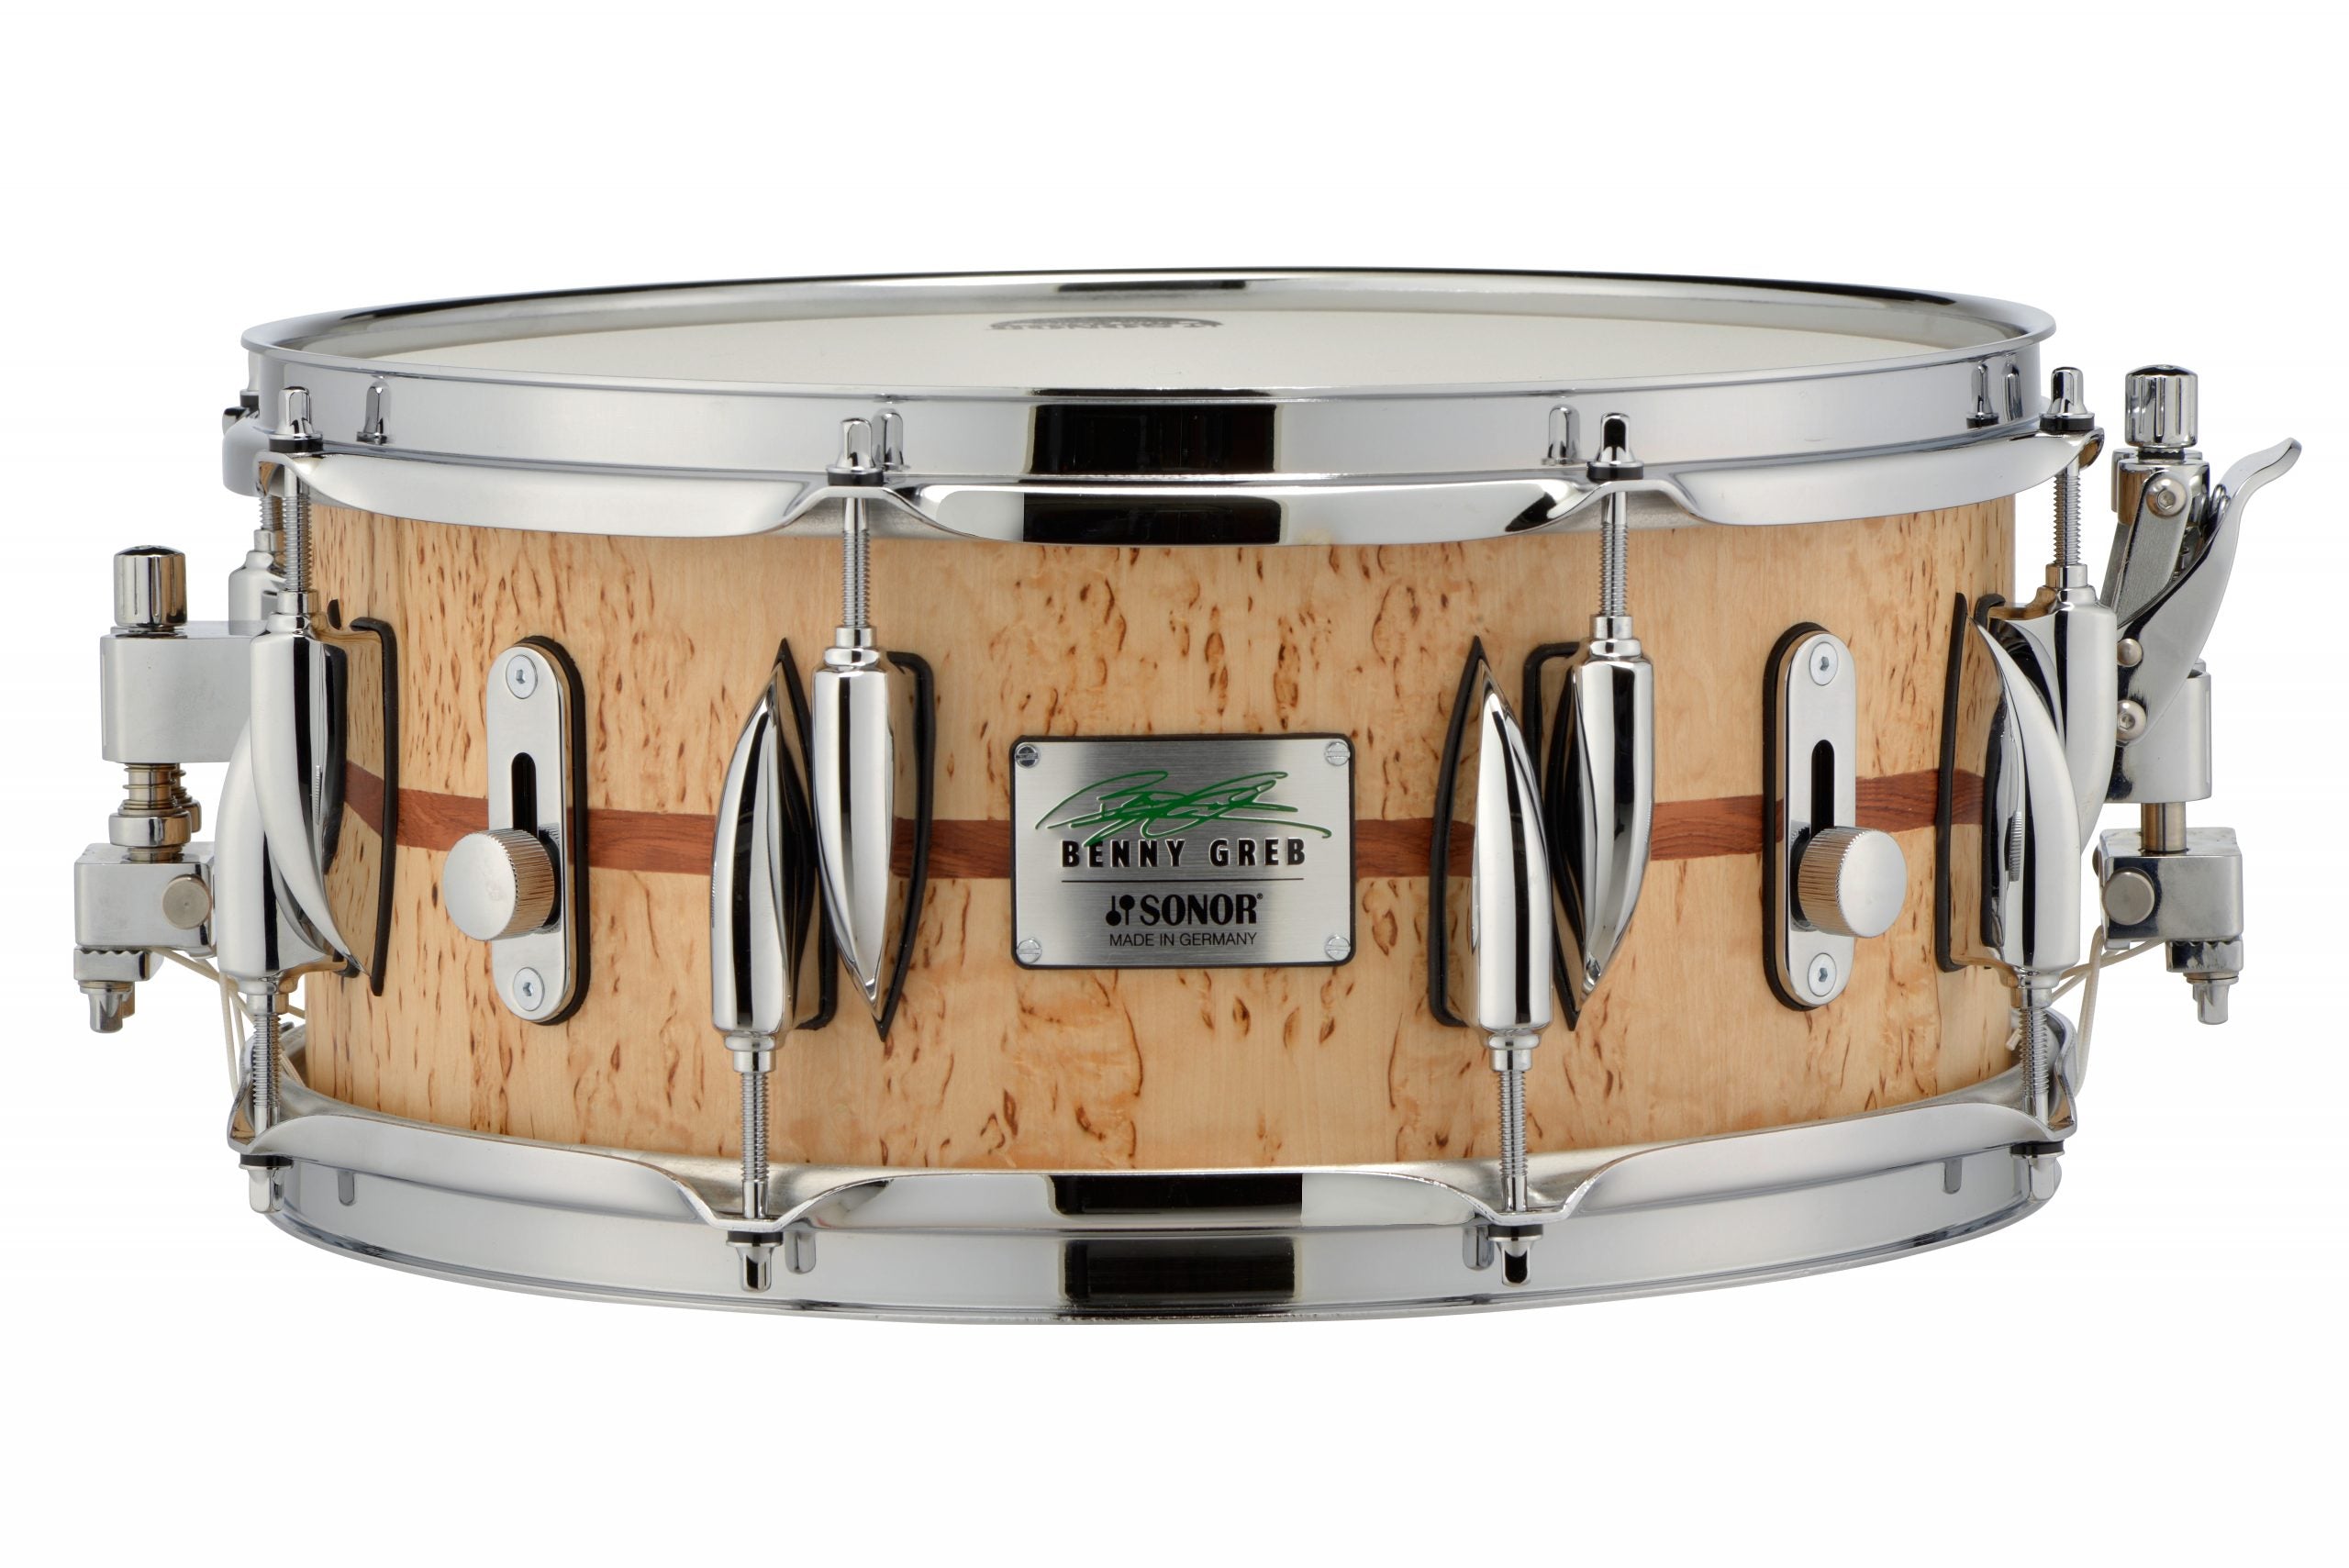 SONOR Benny Greb Signature Snare 2.0 - 13'x5.75' - Beech Shell